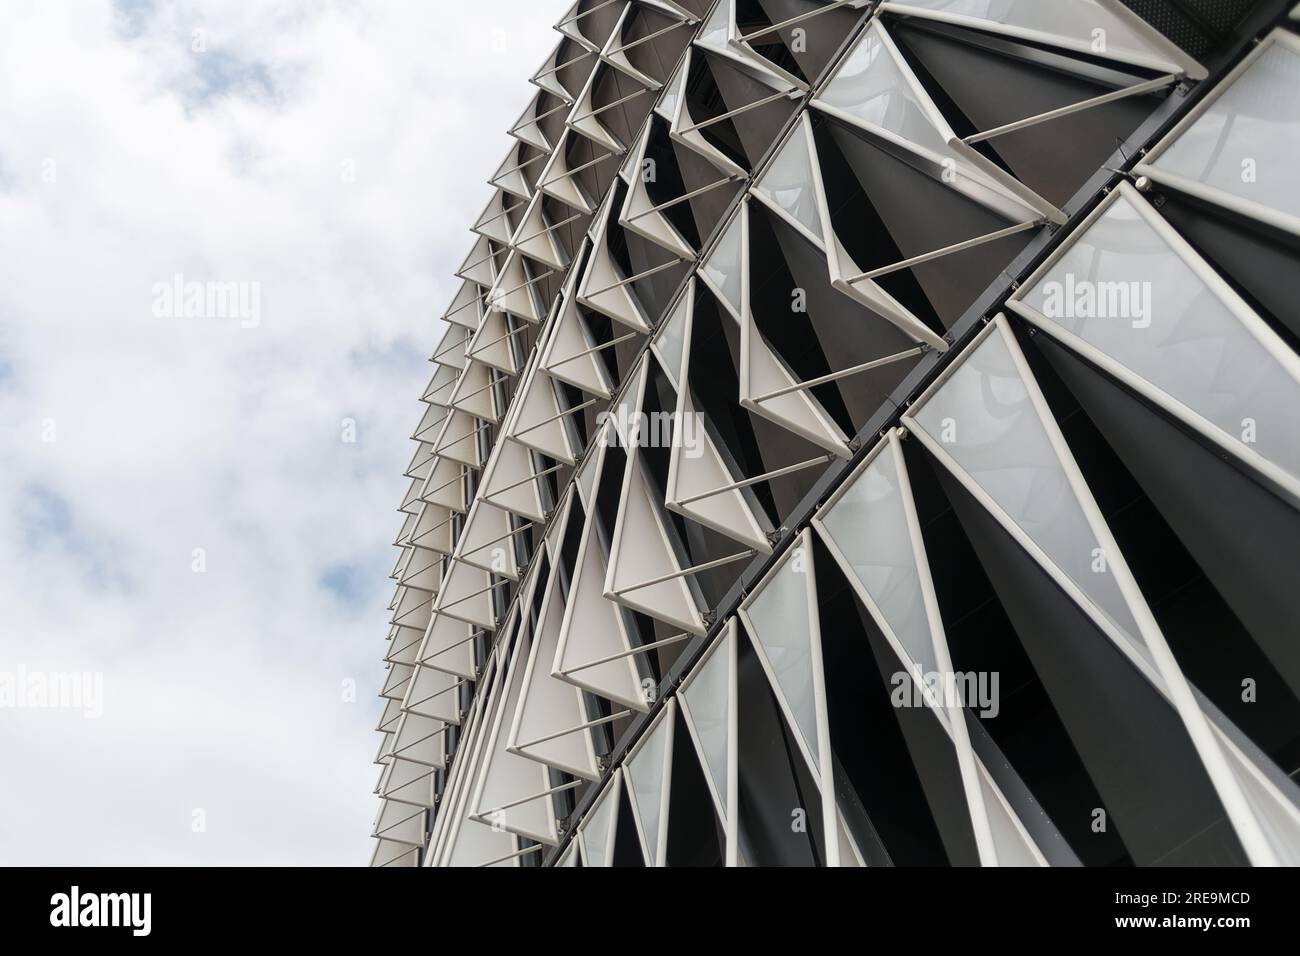 View at the facade details on exterior at the San Mamés soccer stadium, the iconic Athletic Club Bilbao stadium, modern piece of architecture on Bilba Stock Photo